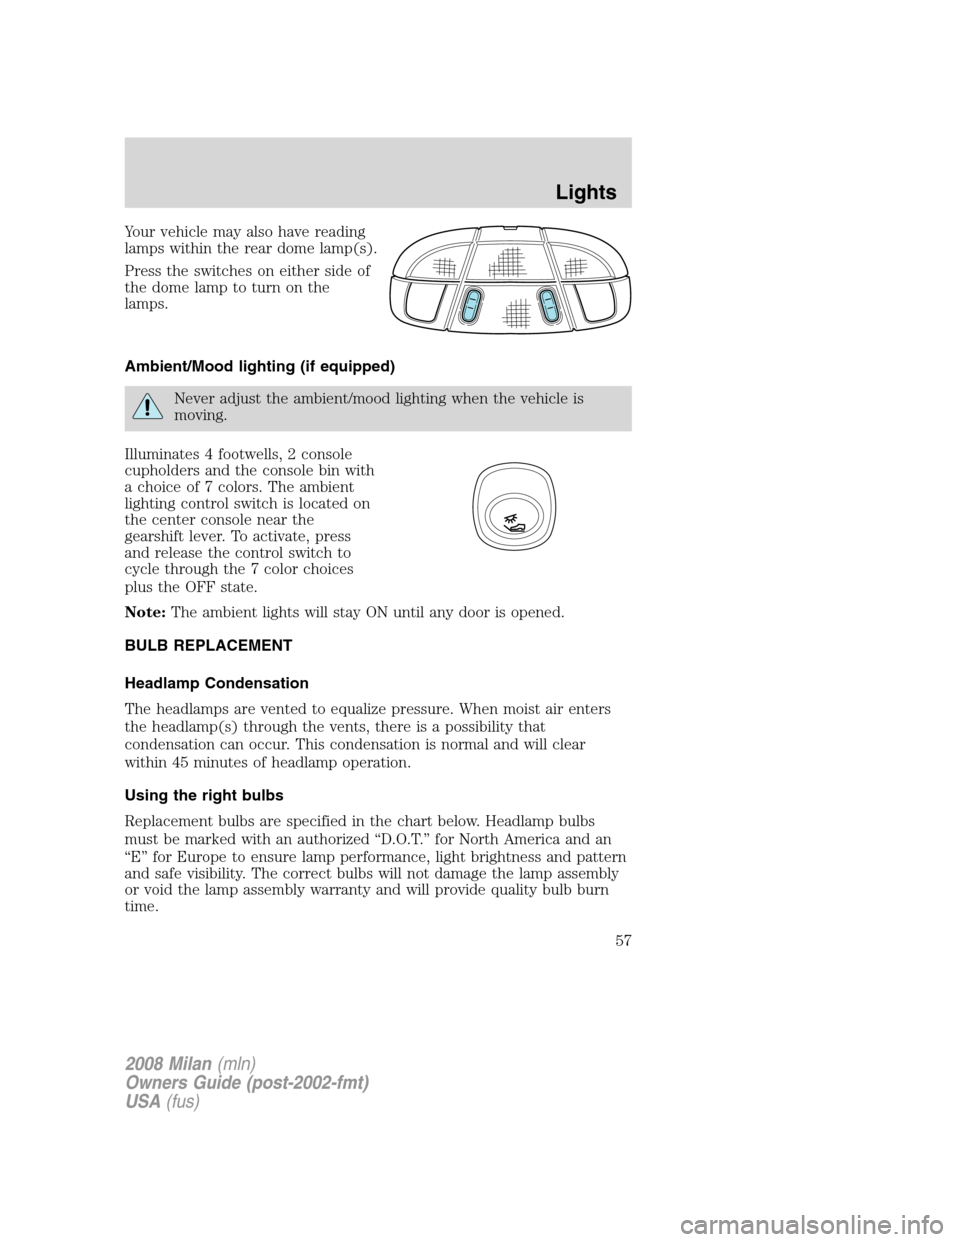 Mercury Milan 2008  Owners Manuals Your vehicle may also have reading
lamps within the rear dome lamp(s).
Press the switches on either side of
the dome lamp to turn on the
lamps.
Ambient/Mood lighting (if equipped)
Never adjust the amb